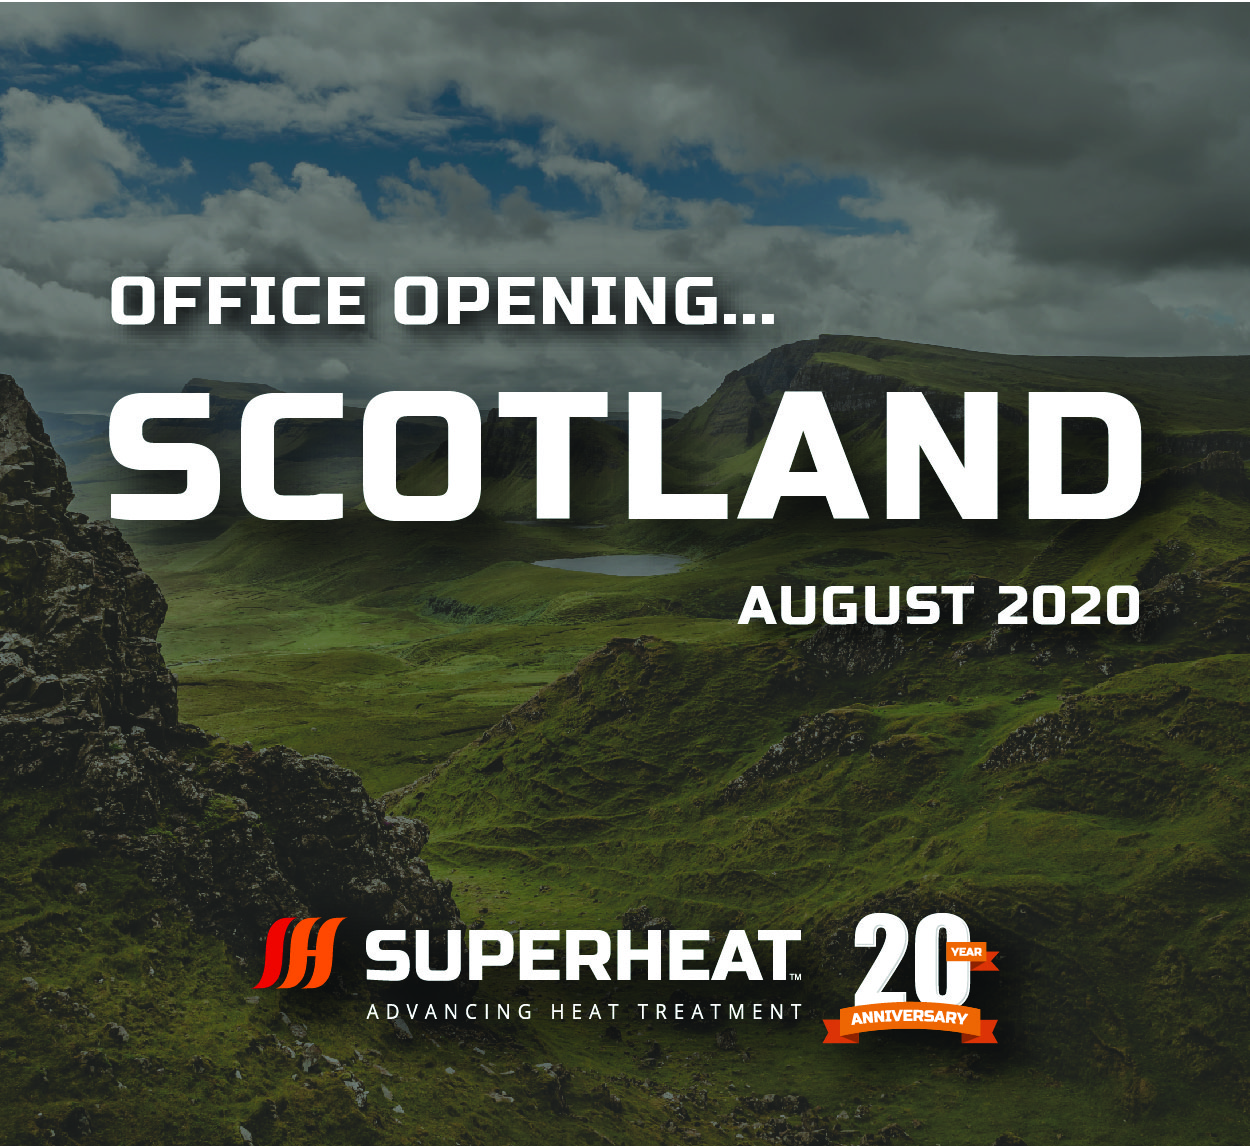 New Office Opening in Scotland in August 2020 Thumbnail